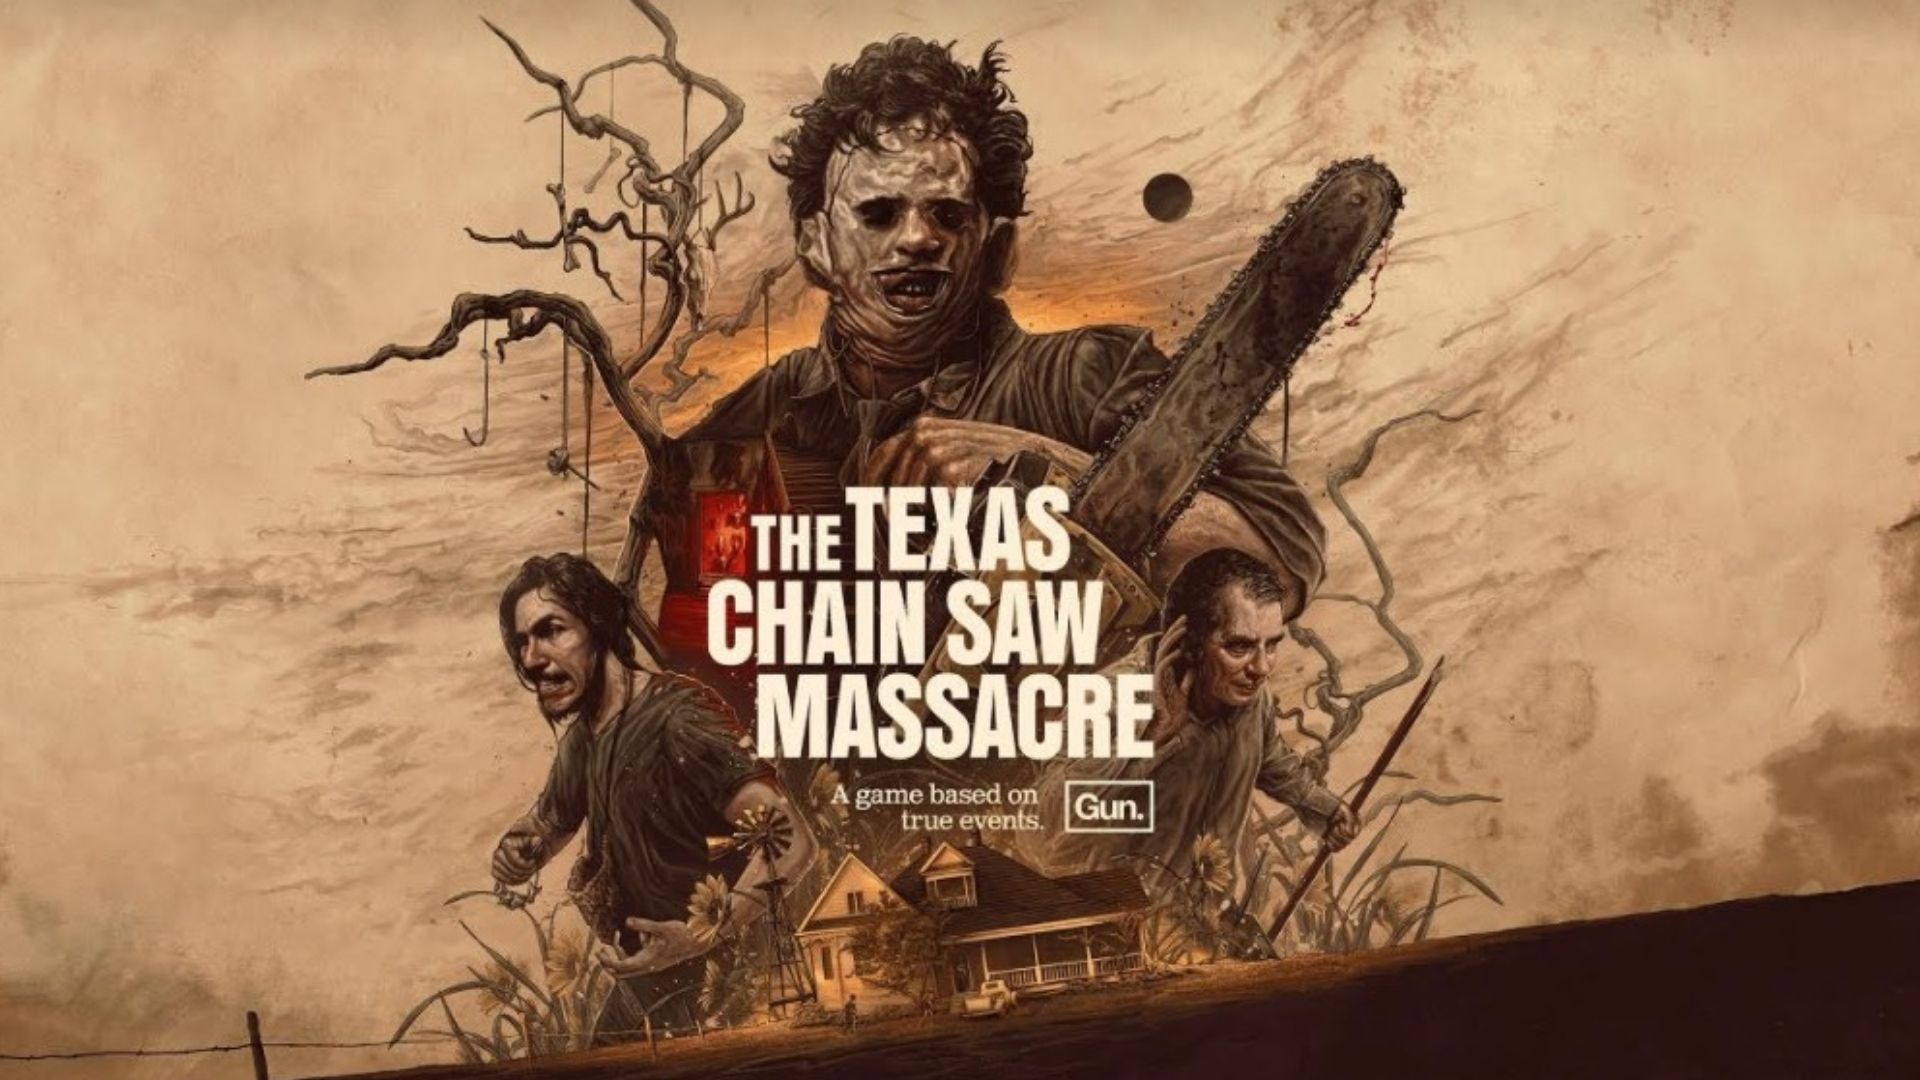 The Texas Chain Saw Massacre Won’t Have Offline Mode or Bots